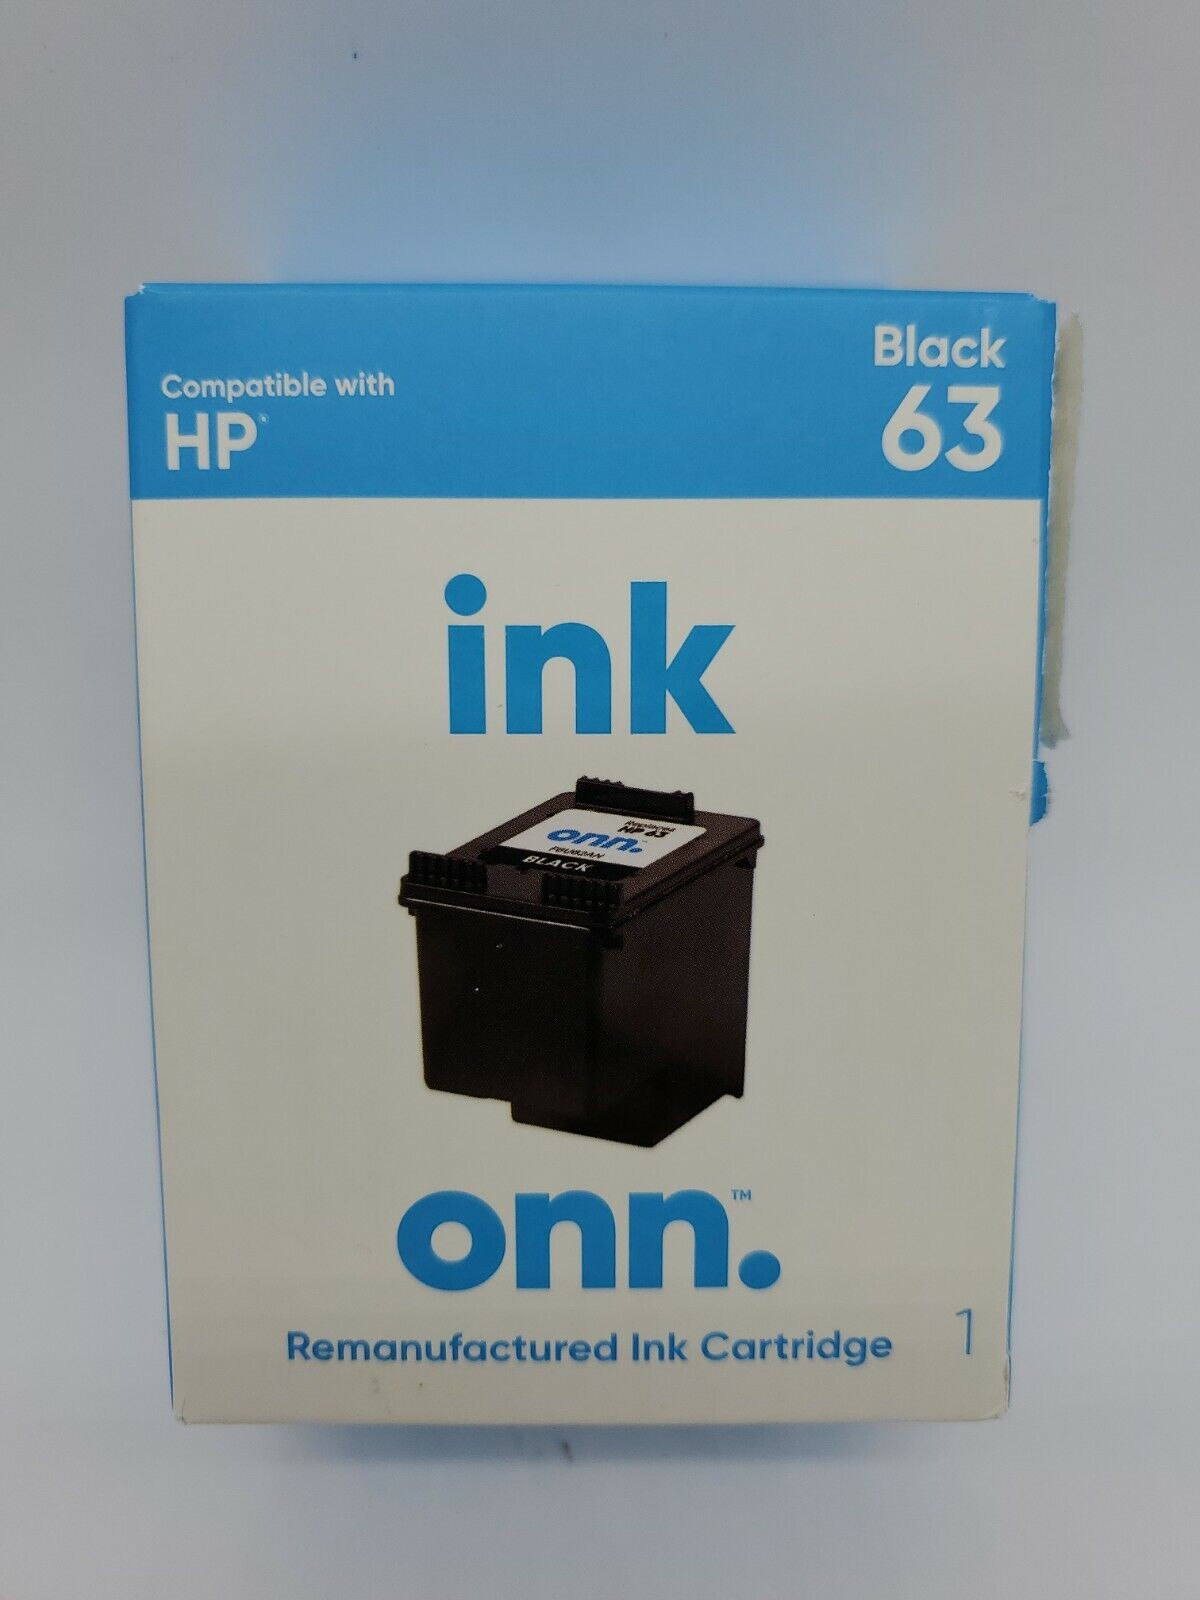 Onn. Ink Cartridge Black 63 Compatible With HP